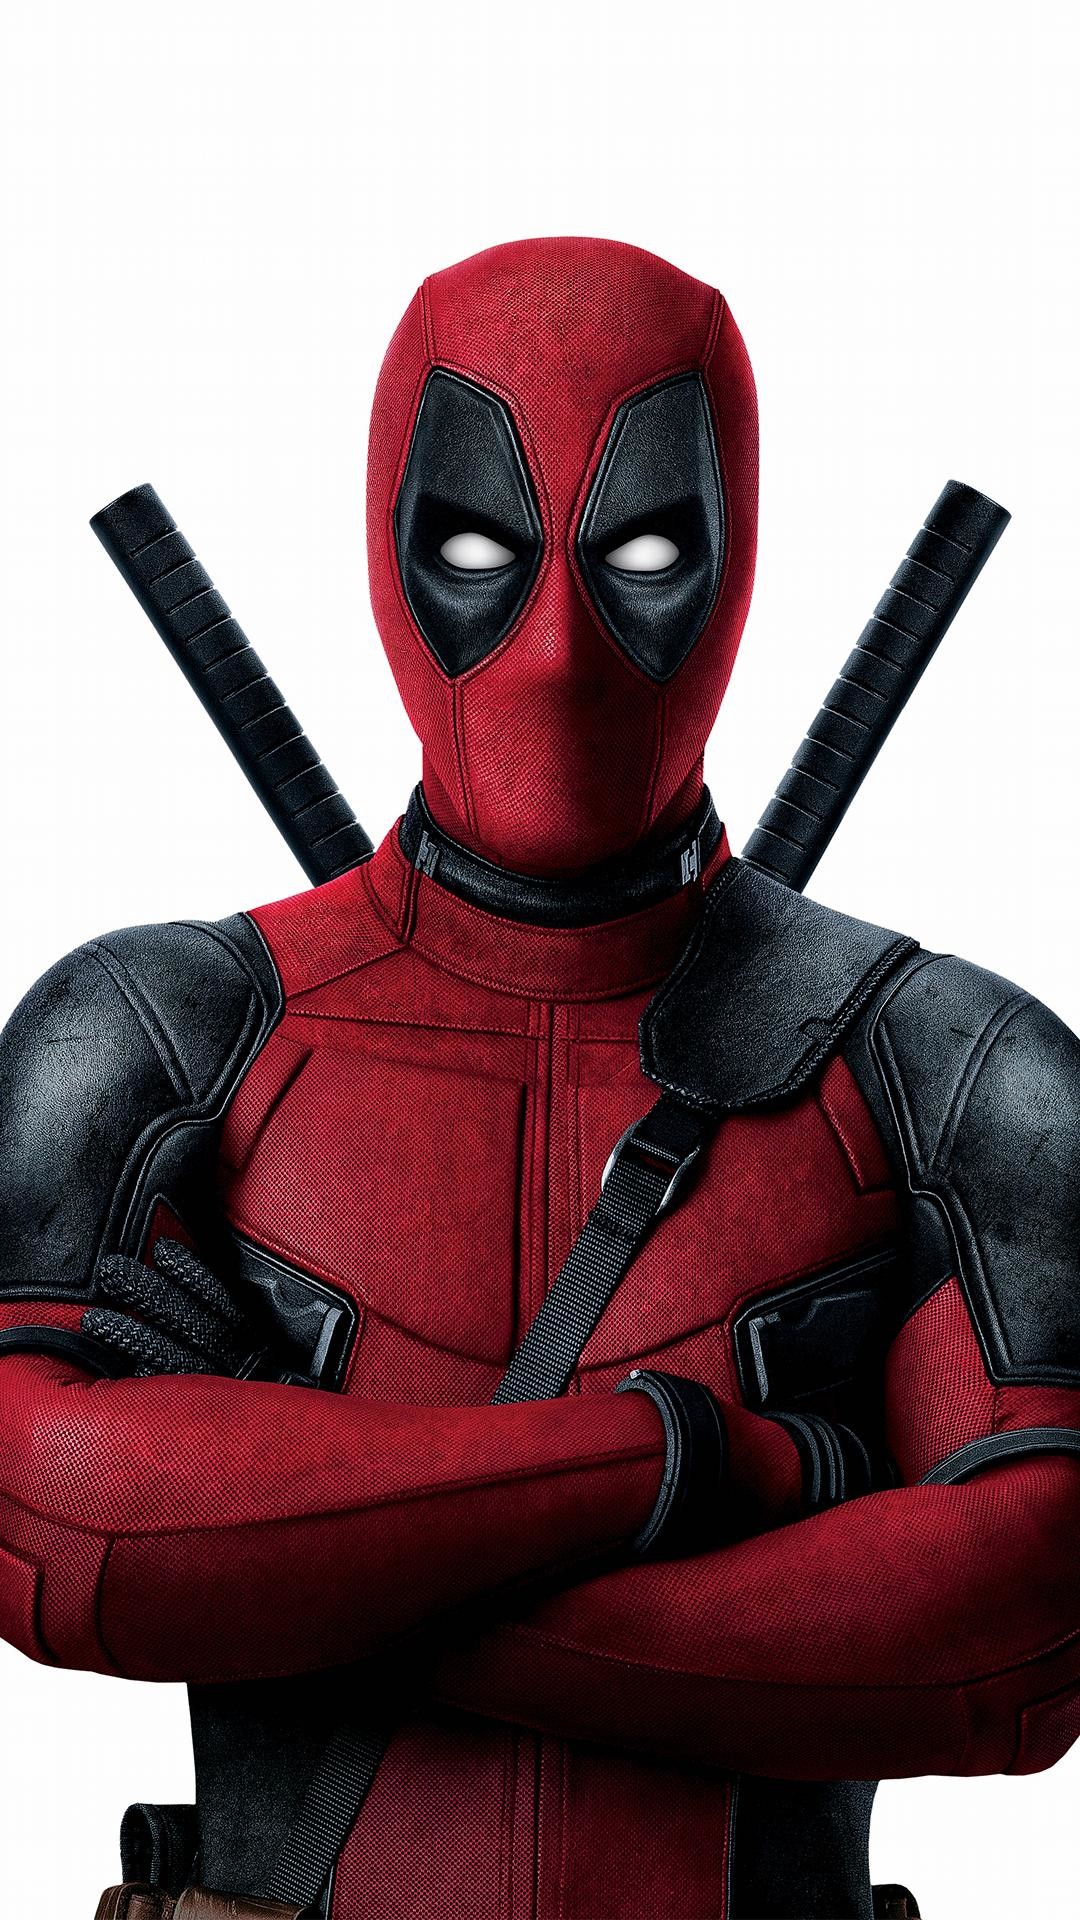 1080x1920 Deadpool  Need #iPhone #6S #Plus #Wallpaper/ #Background for #